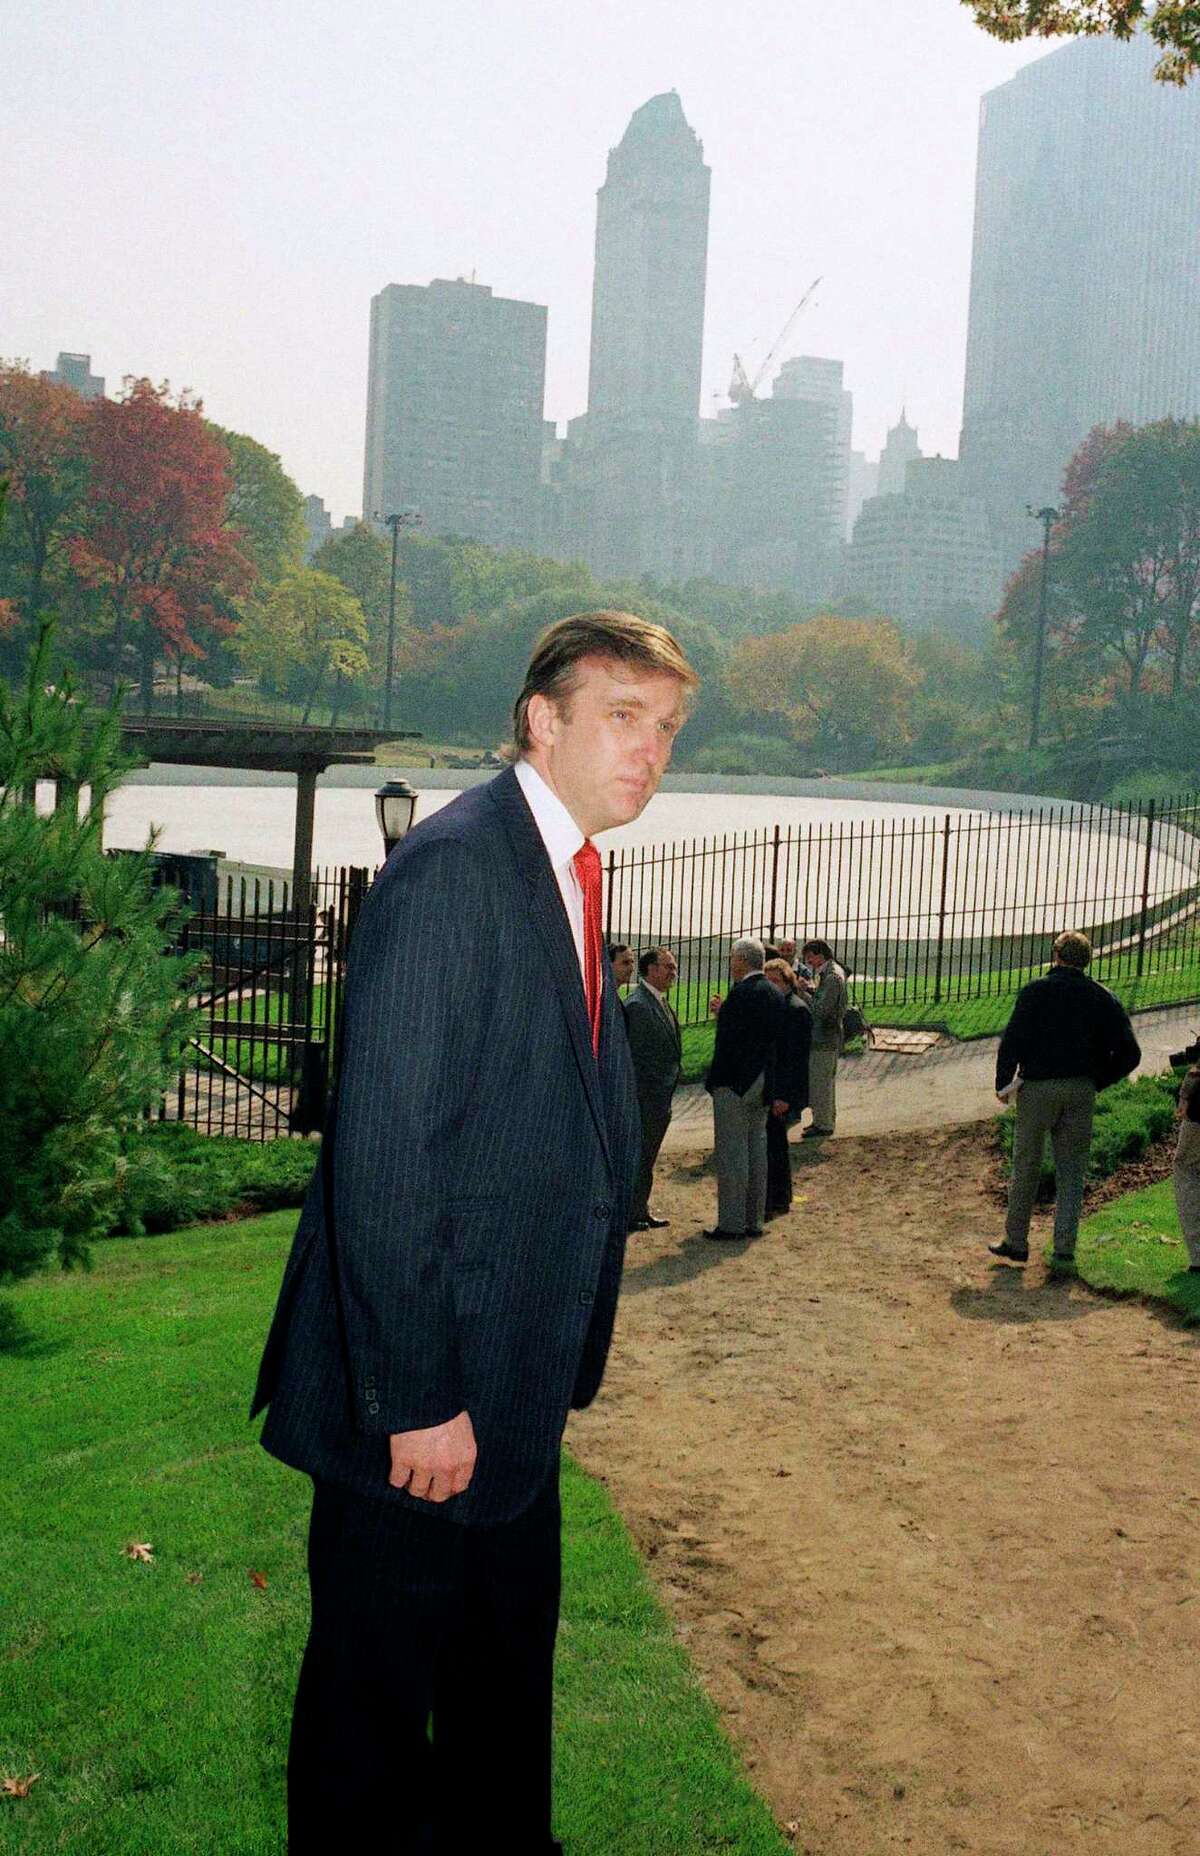 In this Oct. 23, 1986 photo, Donald Trump is photographed in New York’s Central Park, in front of the Wollman Skating Rink, which he offered to rebuild after the city’s renovation effort had come to a standstill.